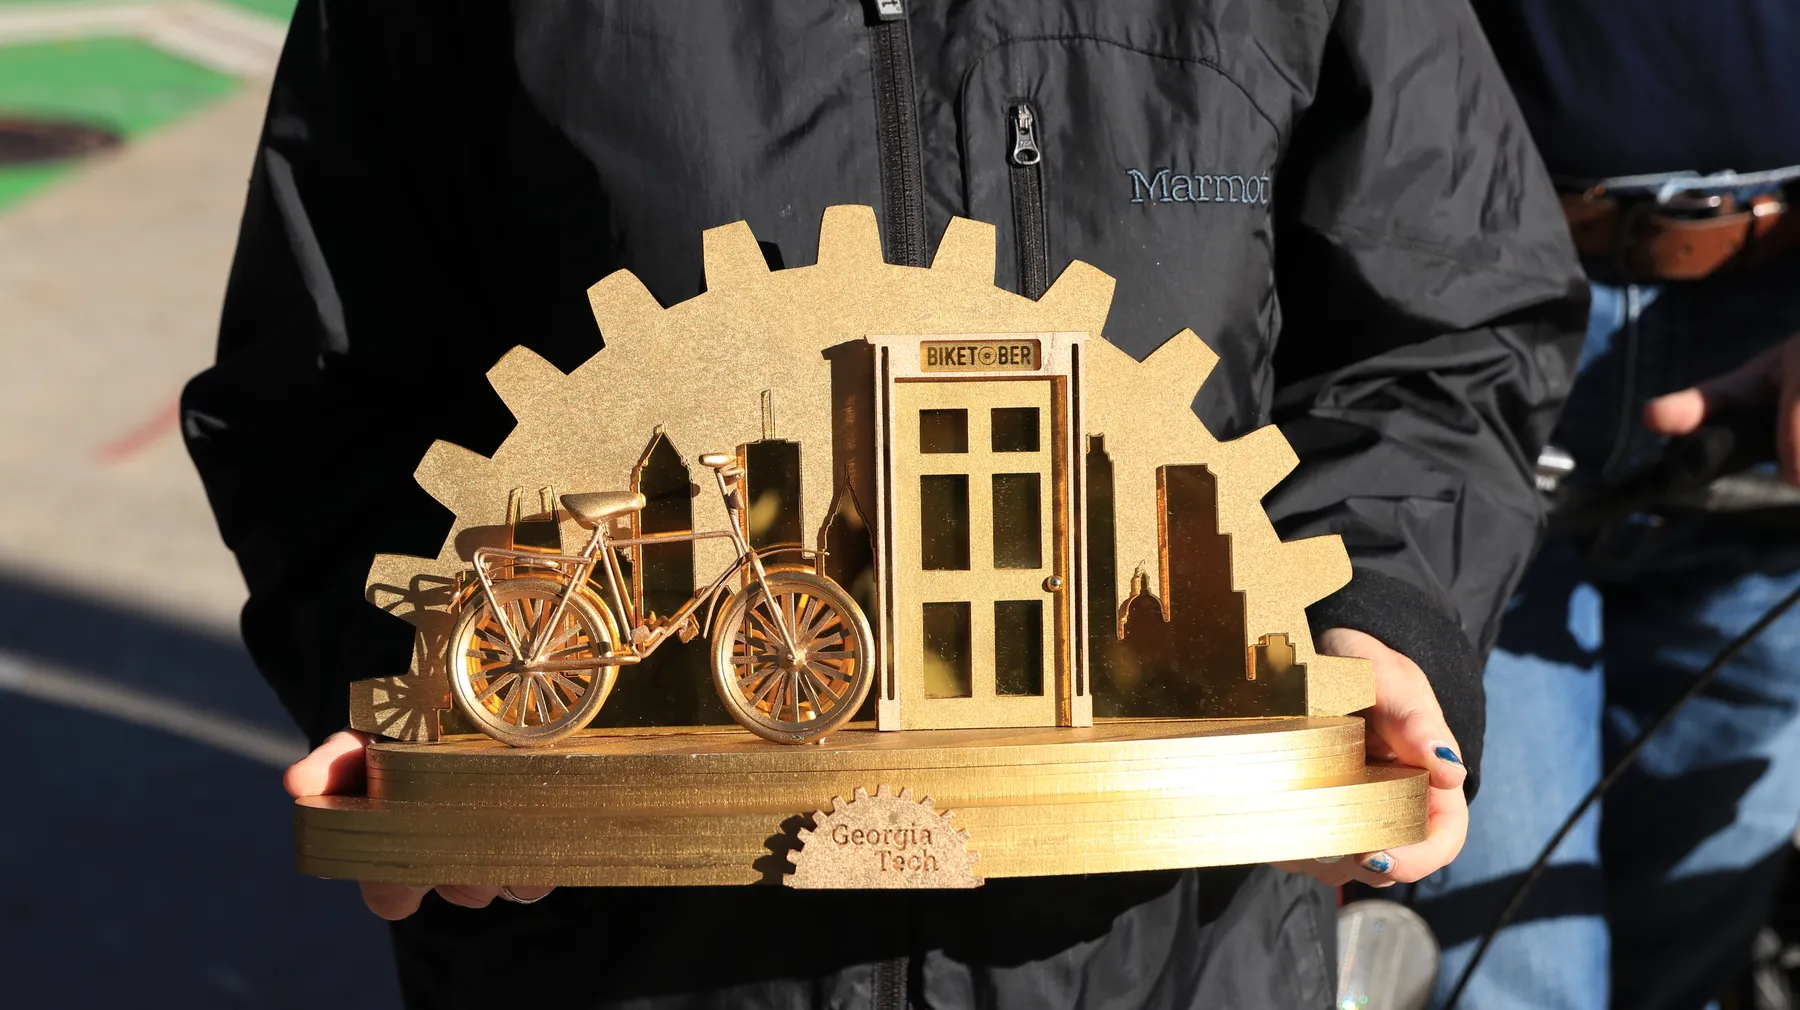 Rolling to victory! Biketober workplace winners share their stories